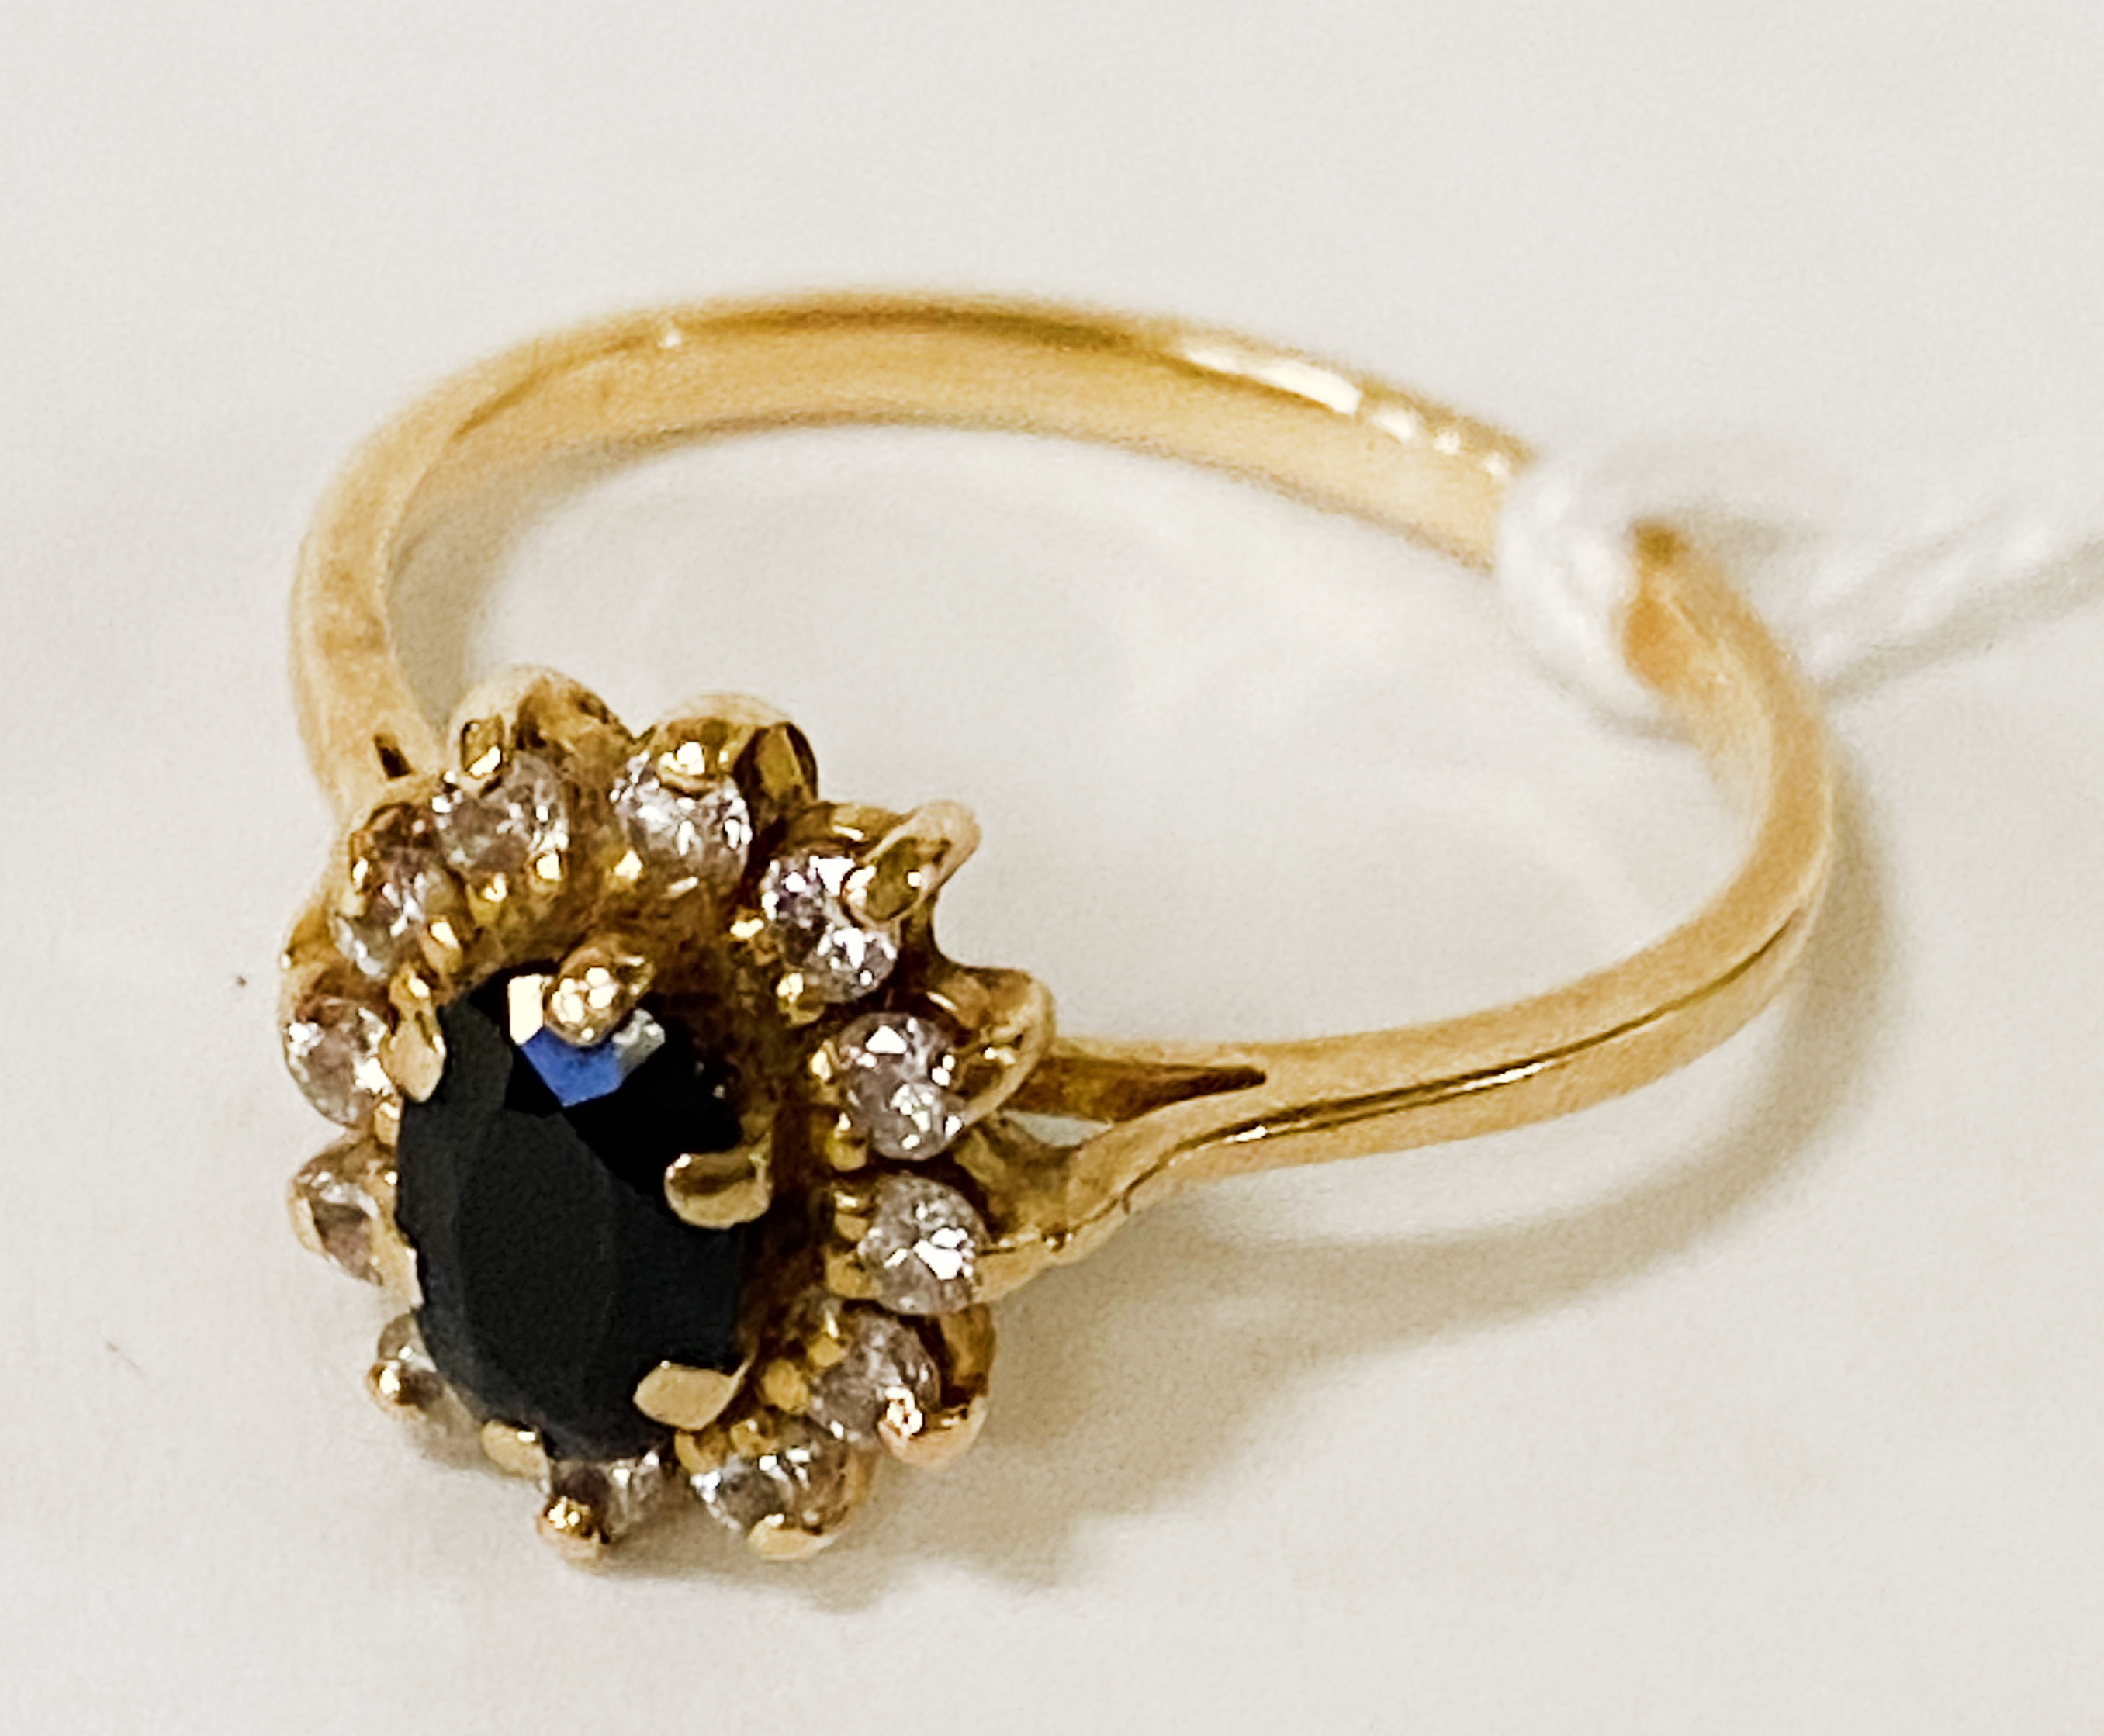 18CT YELLOW GOLD DIAMOND & SAPPHIRE RING SIZE K 2.4 GRAMS APPROX